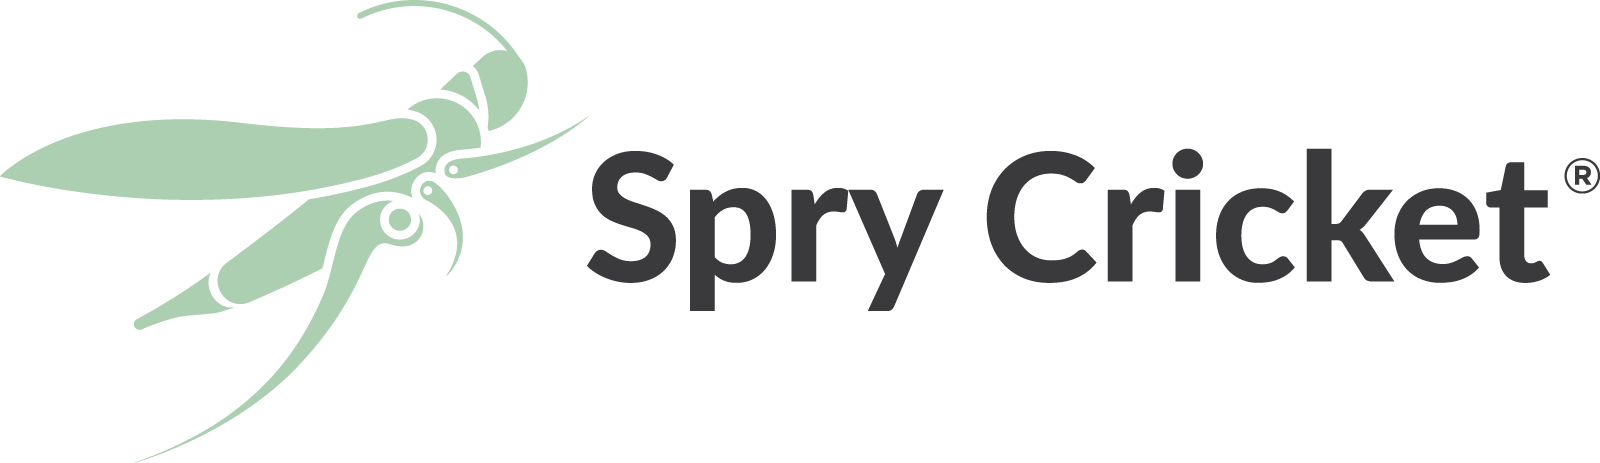 Spry Cricket Resellers